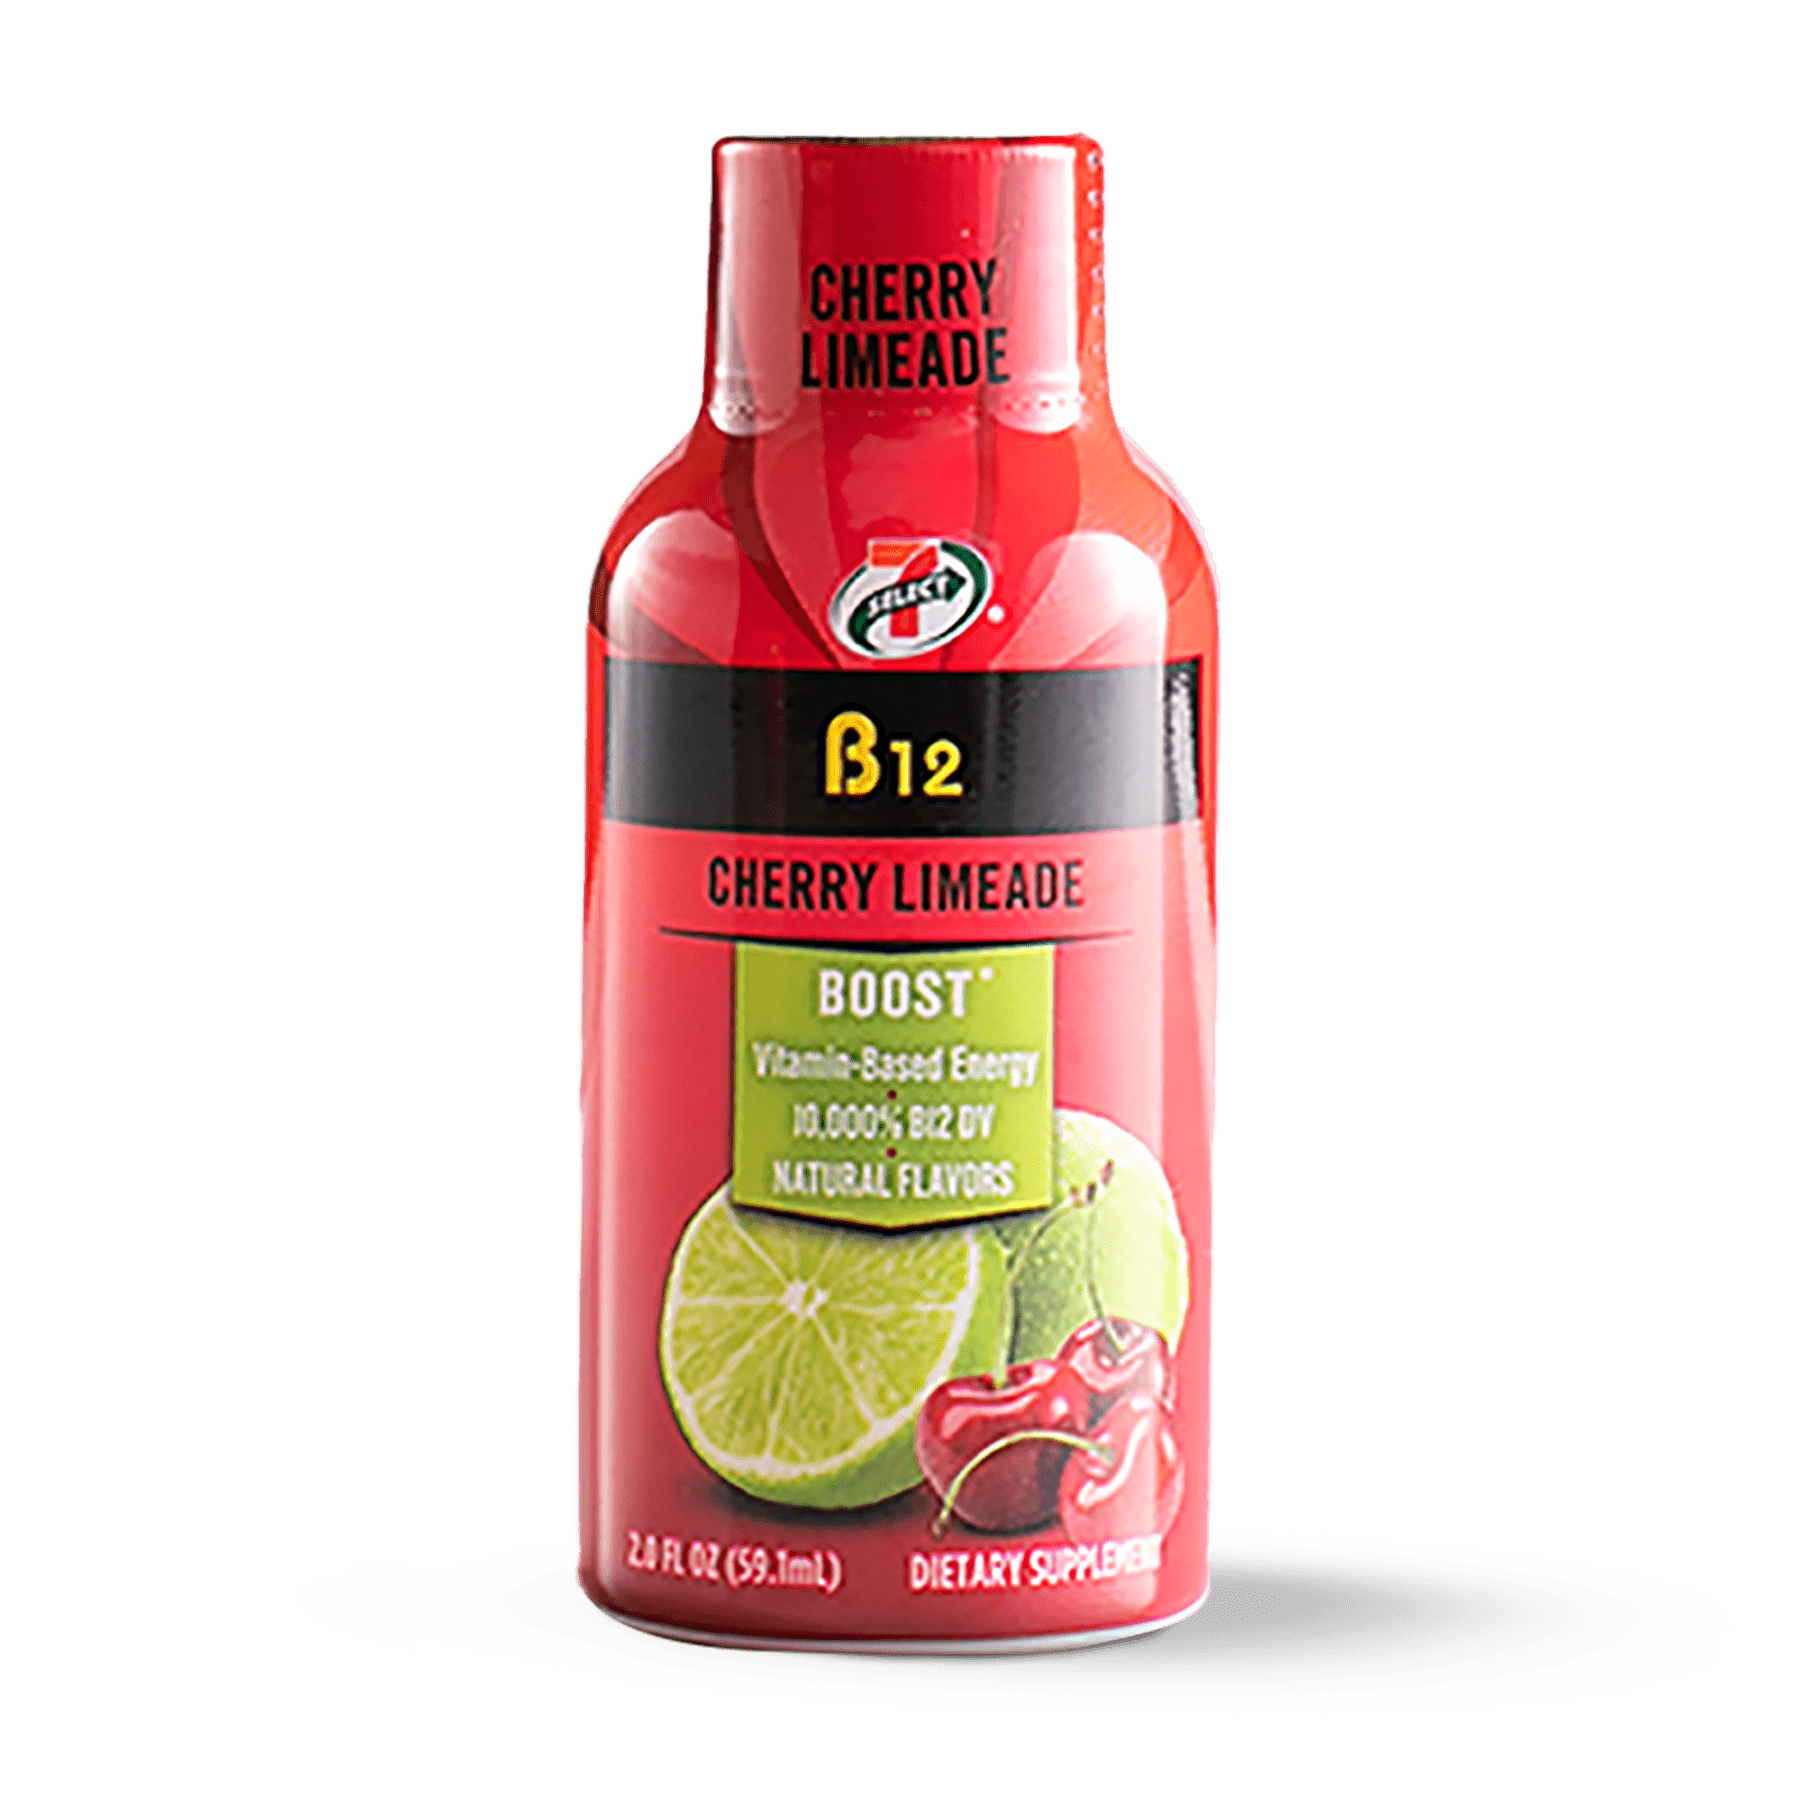 A single 7-Select B12 energy shot in cherry limeade flavor.